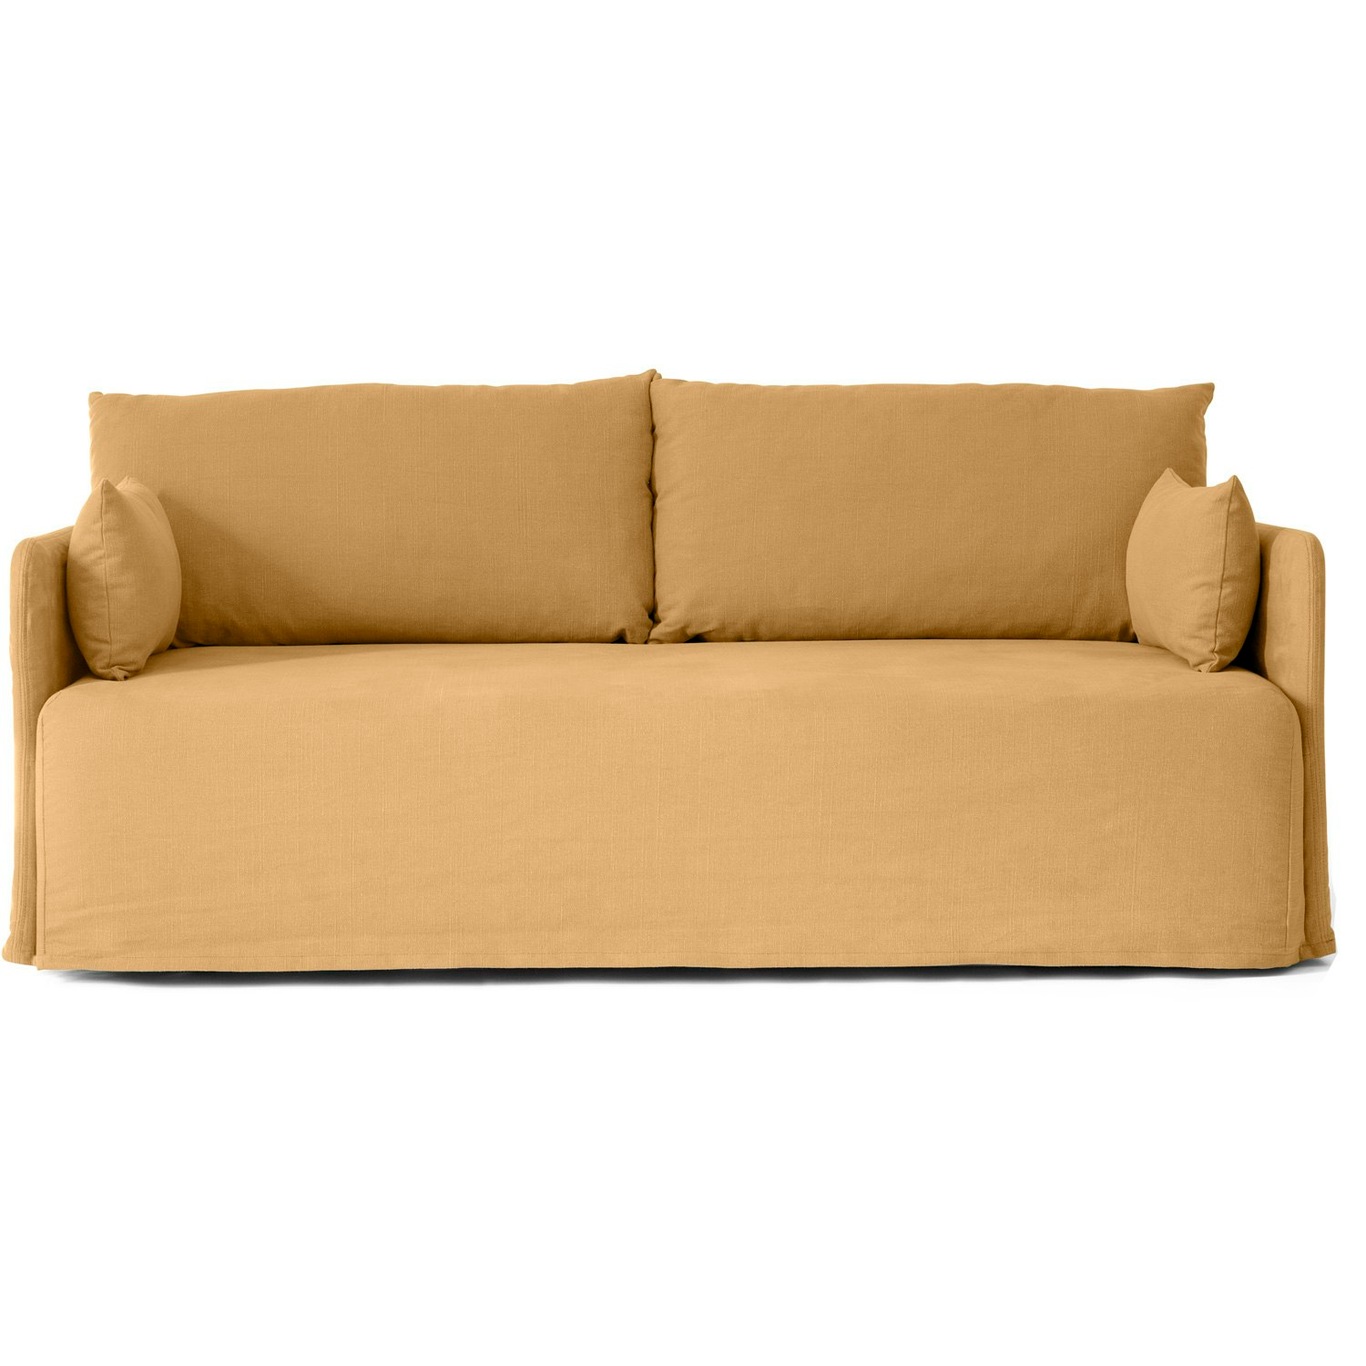 Offset Sofa 2-Seater Removable Upholstery Cotlin, Wheat